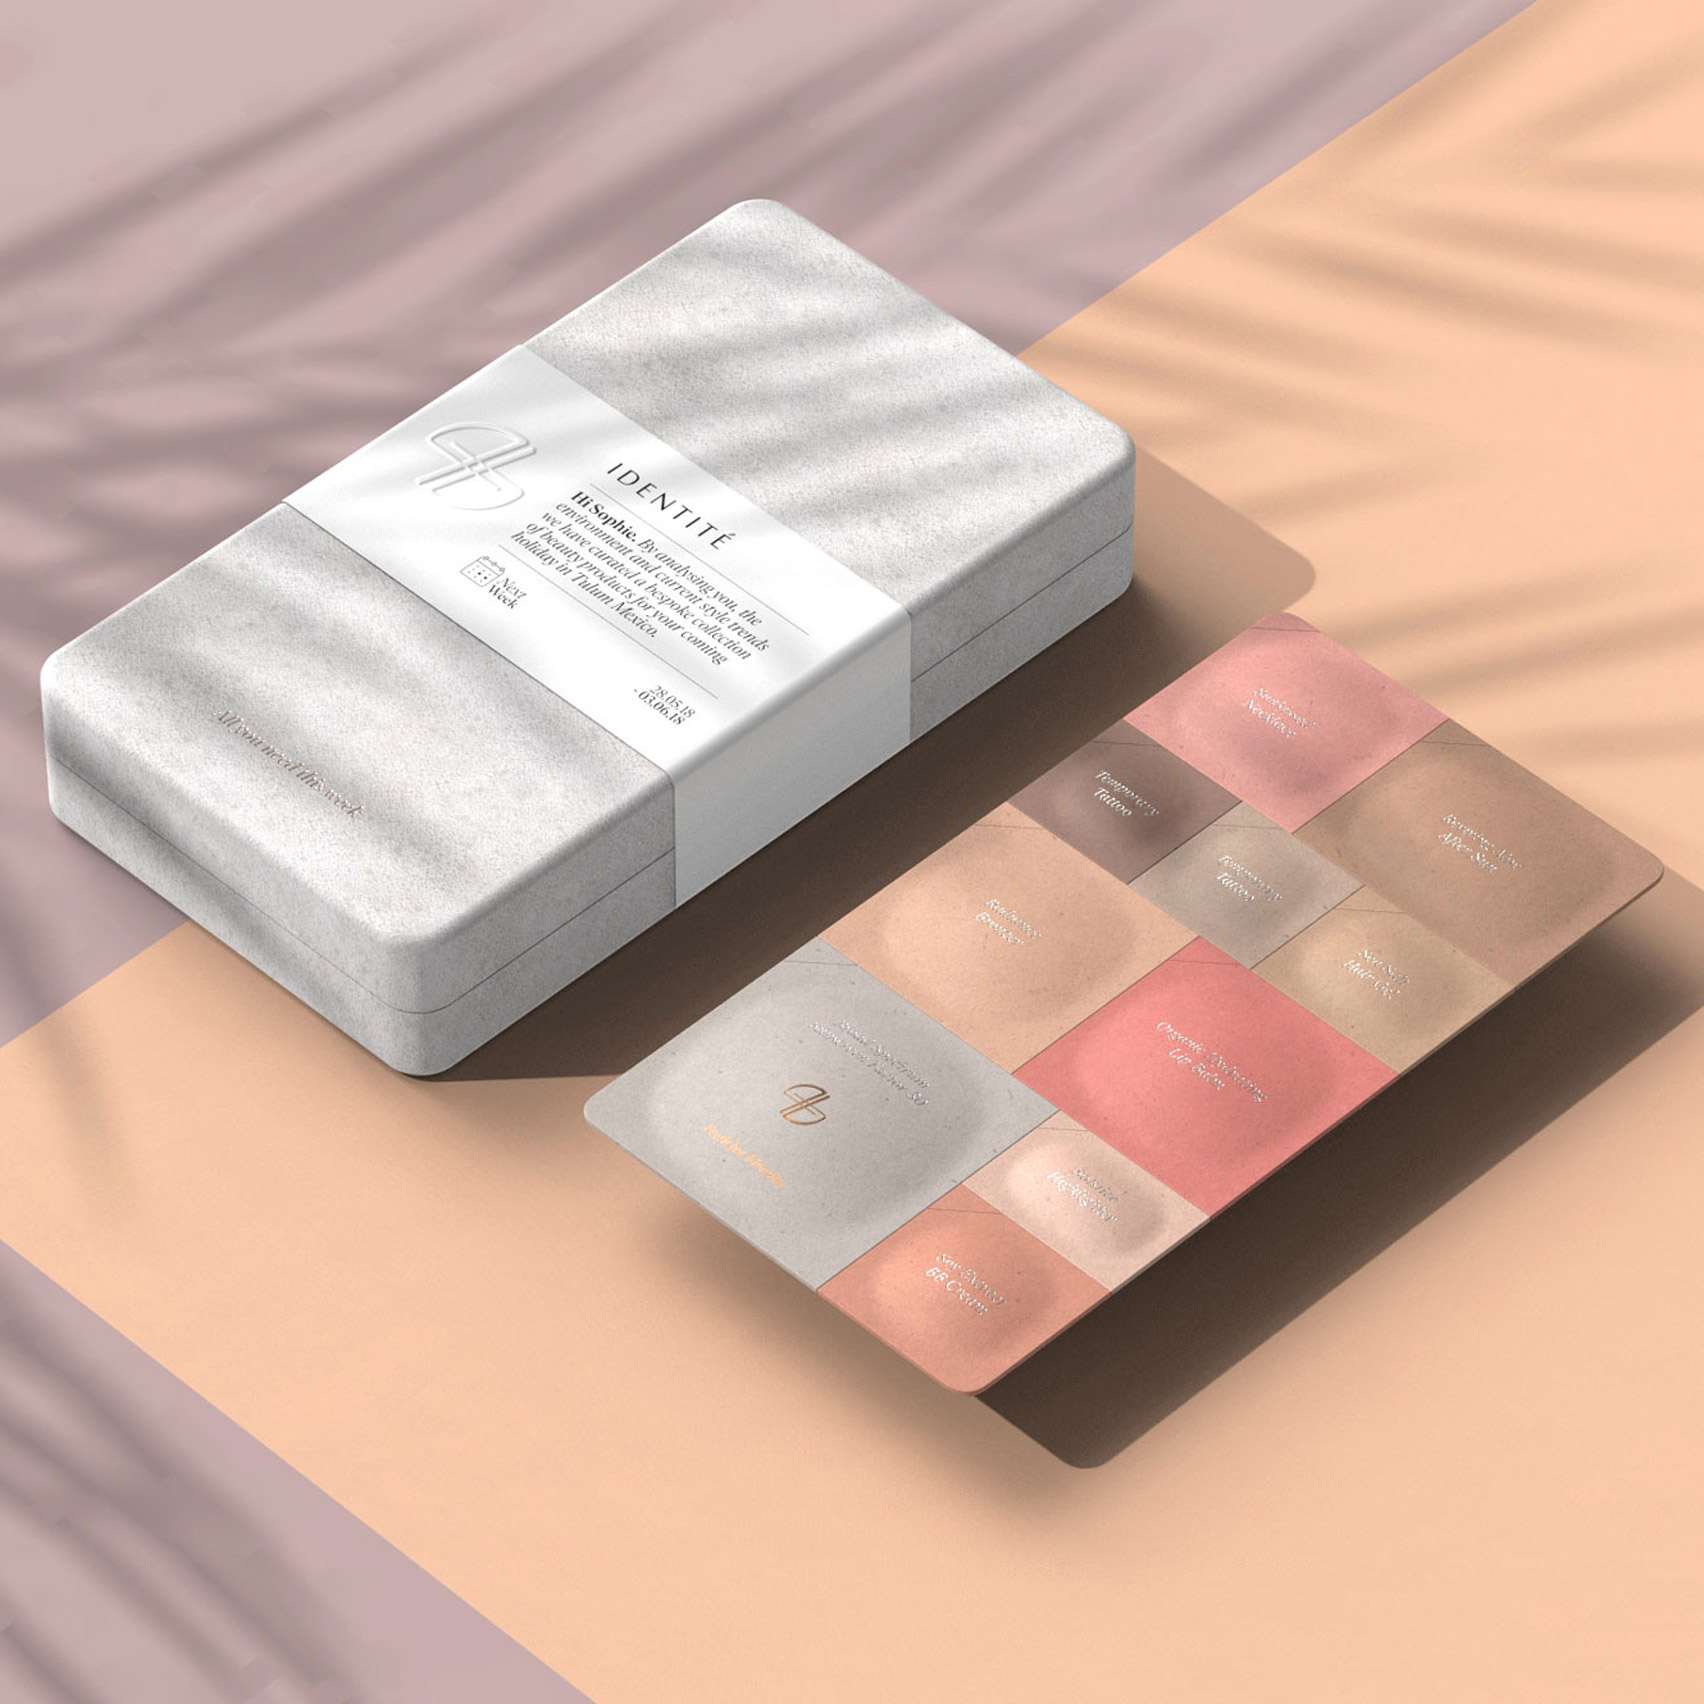 Seven customisable skincare brands harnessing artificial intelligence